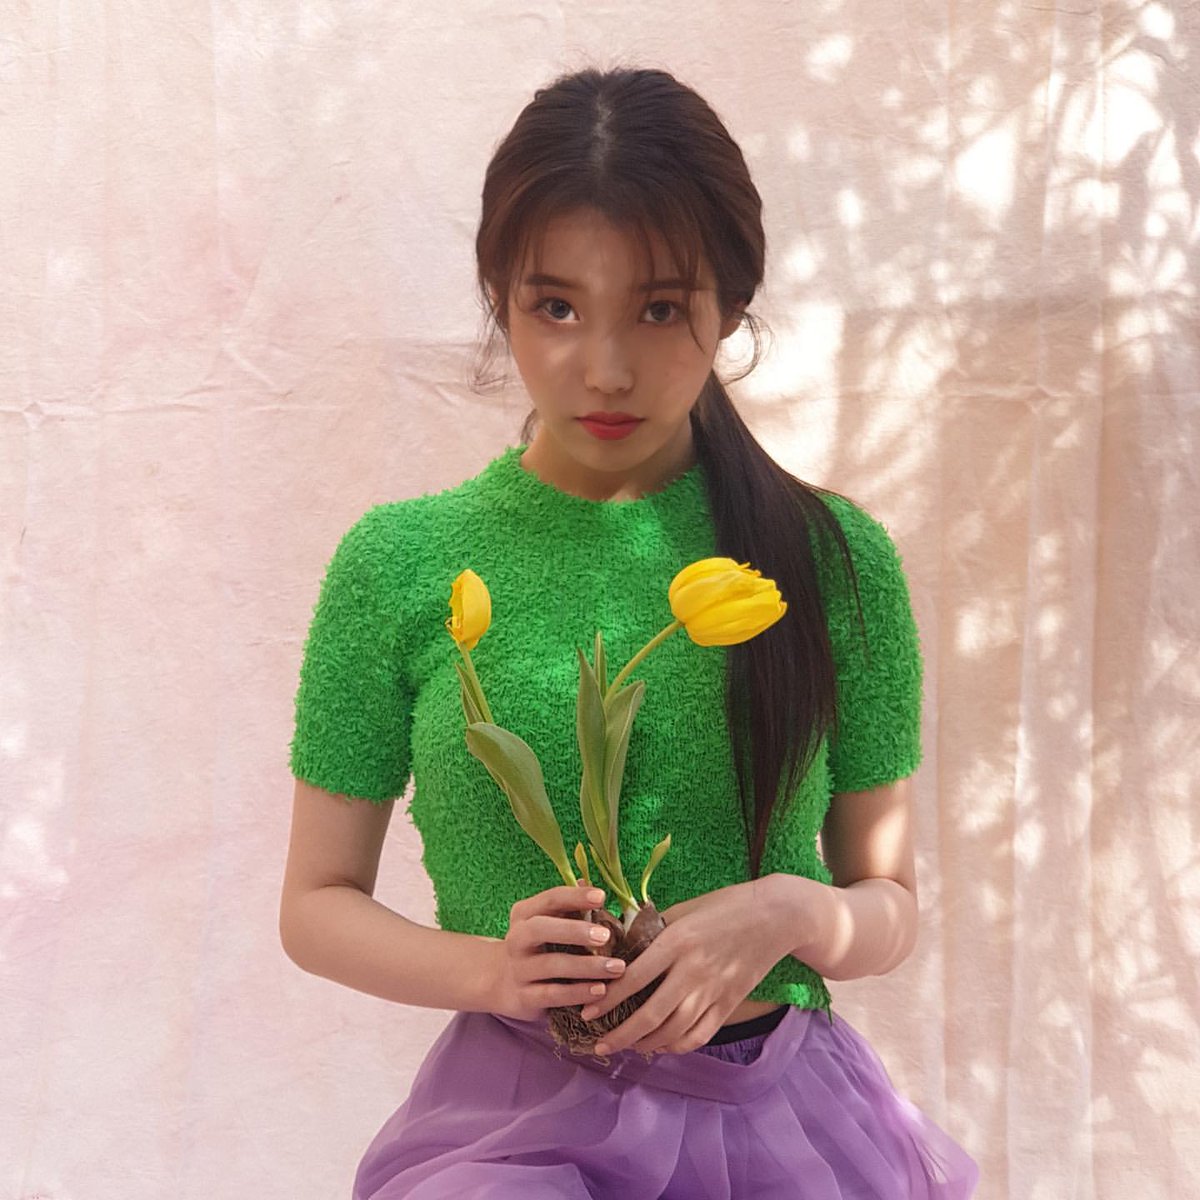 80/366its my special day!!! although i received a bad news,, i still did my best to enjoy this day! uaenas are well fed today keep updating us love u!! @_IUofficial  @lily199iu